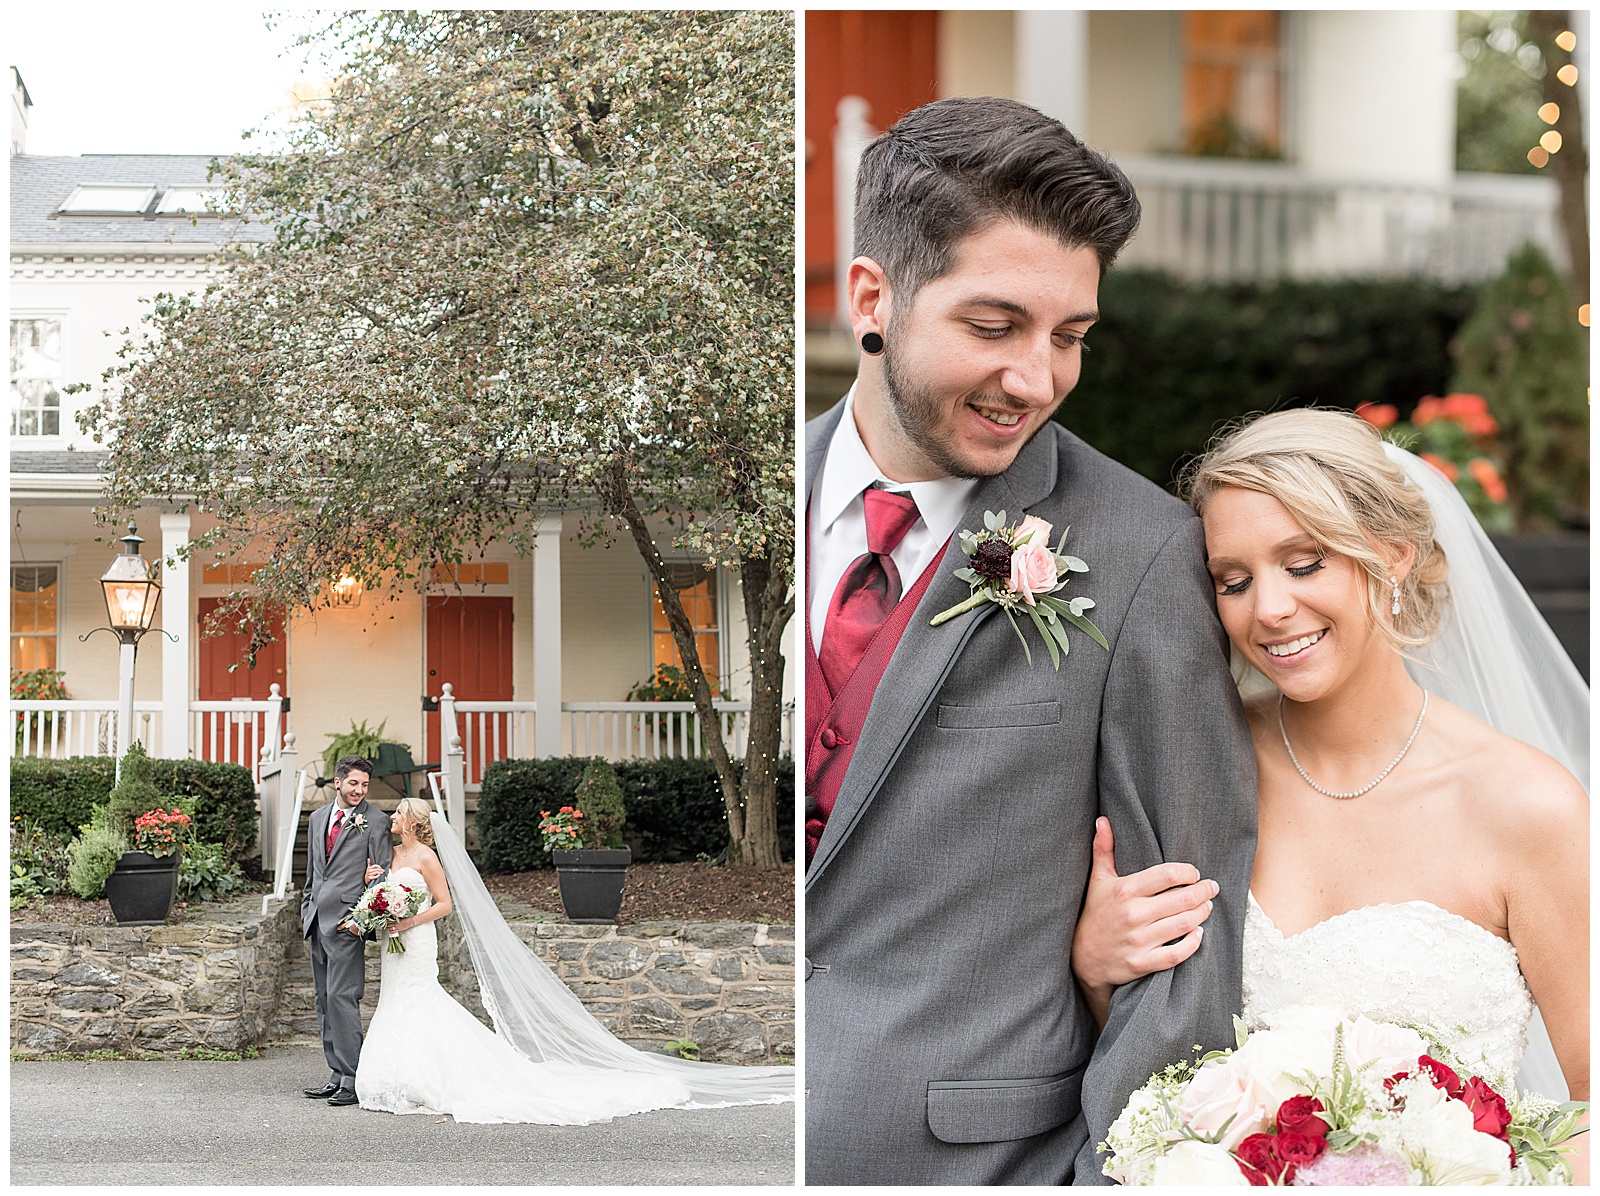 couple is standing in front of white home with two red front doors and large tree on the right and the groom is on the left walking slightly ahead of the bride on the right and looking back at her and they are smiling with her bridal gown and veil extended behind her on the paved driveway at Riverdale Manor in Lancaster, PA, close up photo of the groom on the left and the bride of the right and she is resting her right cheek against his left shoulder with her eyes looking down and smiling and the groom is looking down at her smiling and her right hand is wrapped around his left arm in front of the white house at Riverdale Manor in Lancaster, PA